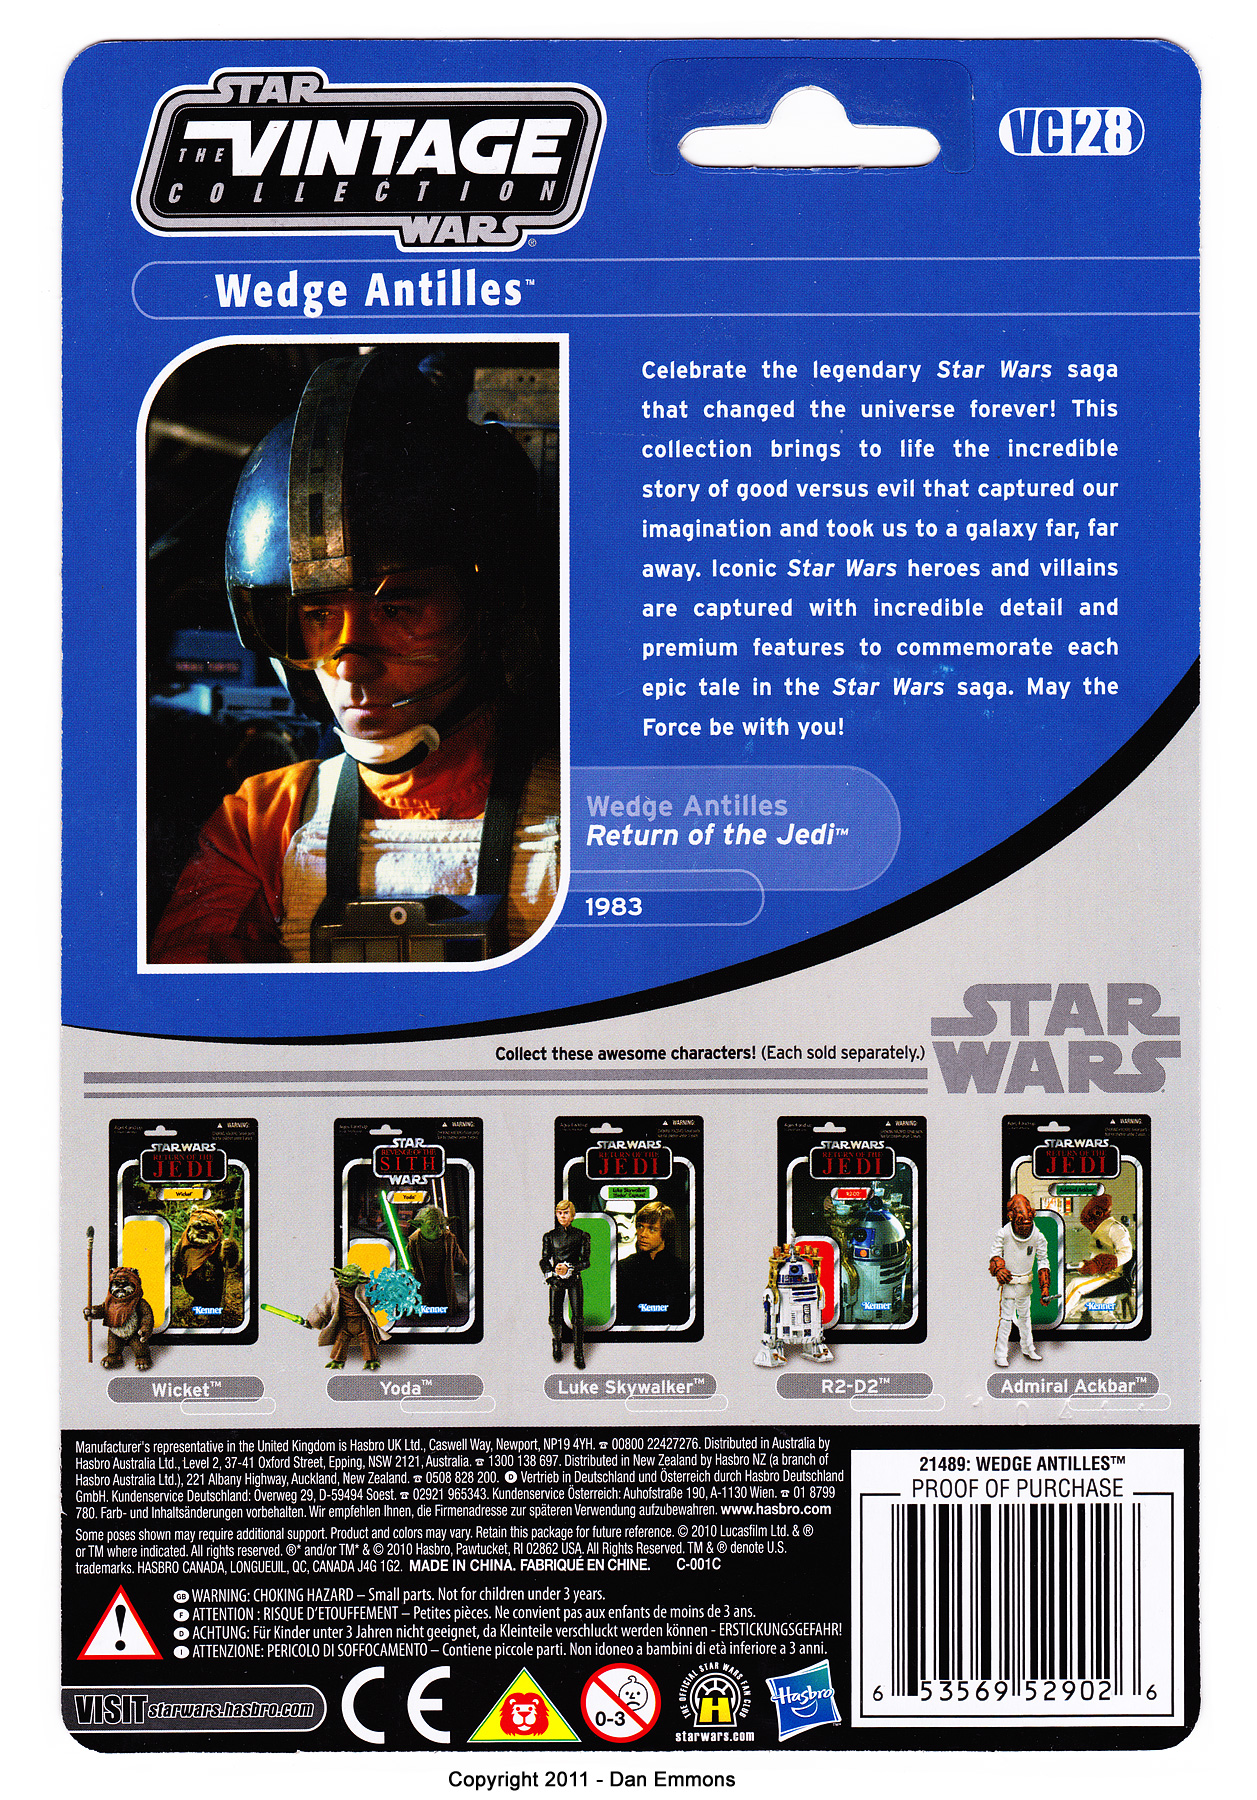 The Vintage Collection - VC28: Wedge Antilles - Variation - Old Card Front Images Shown On Back Of Card